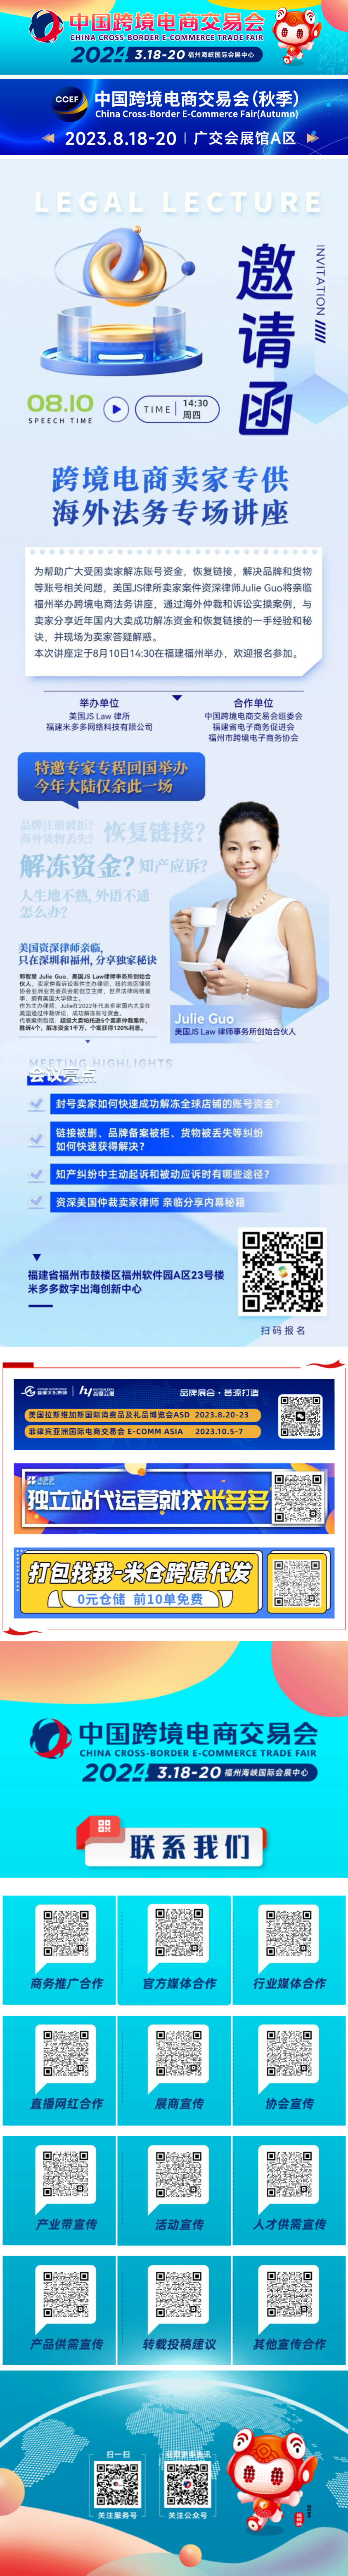 FireShot Capture 016 - [Exclusively for cross-border e-commerce sellers] Special lecture on overseas legal affairs - mp.weixin.qq.com